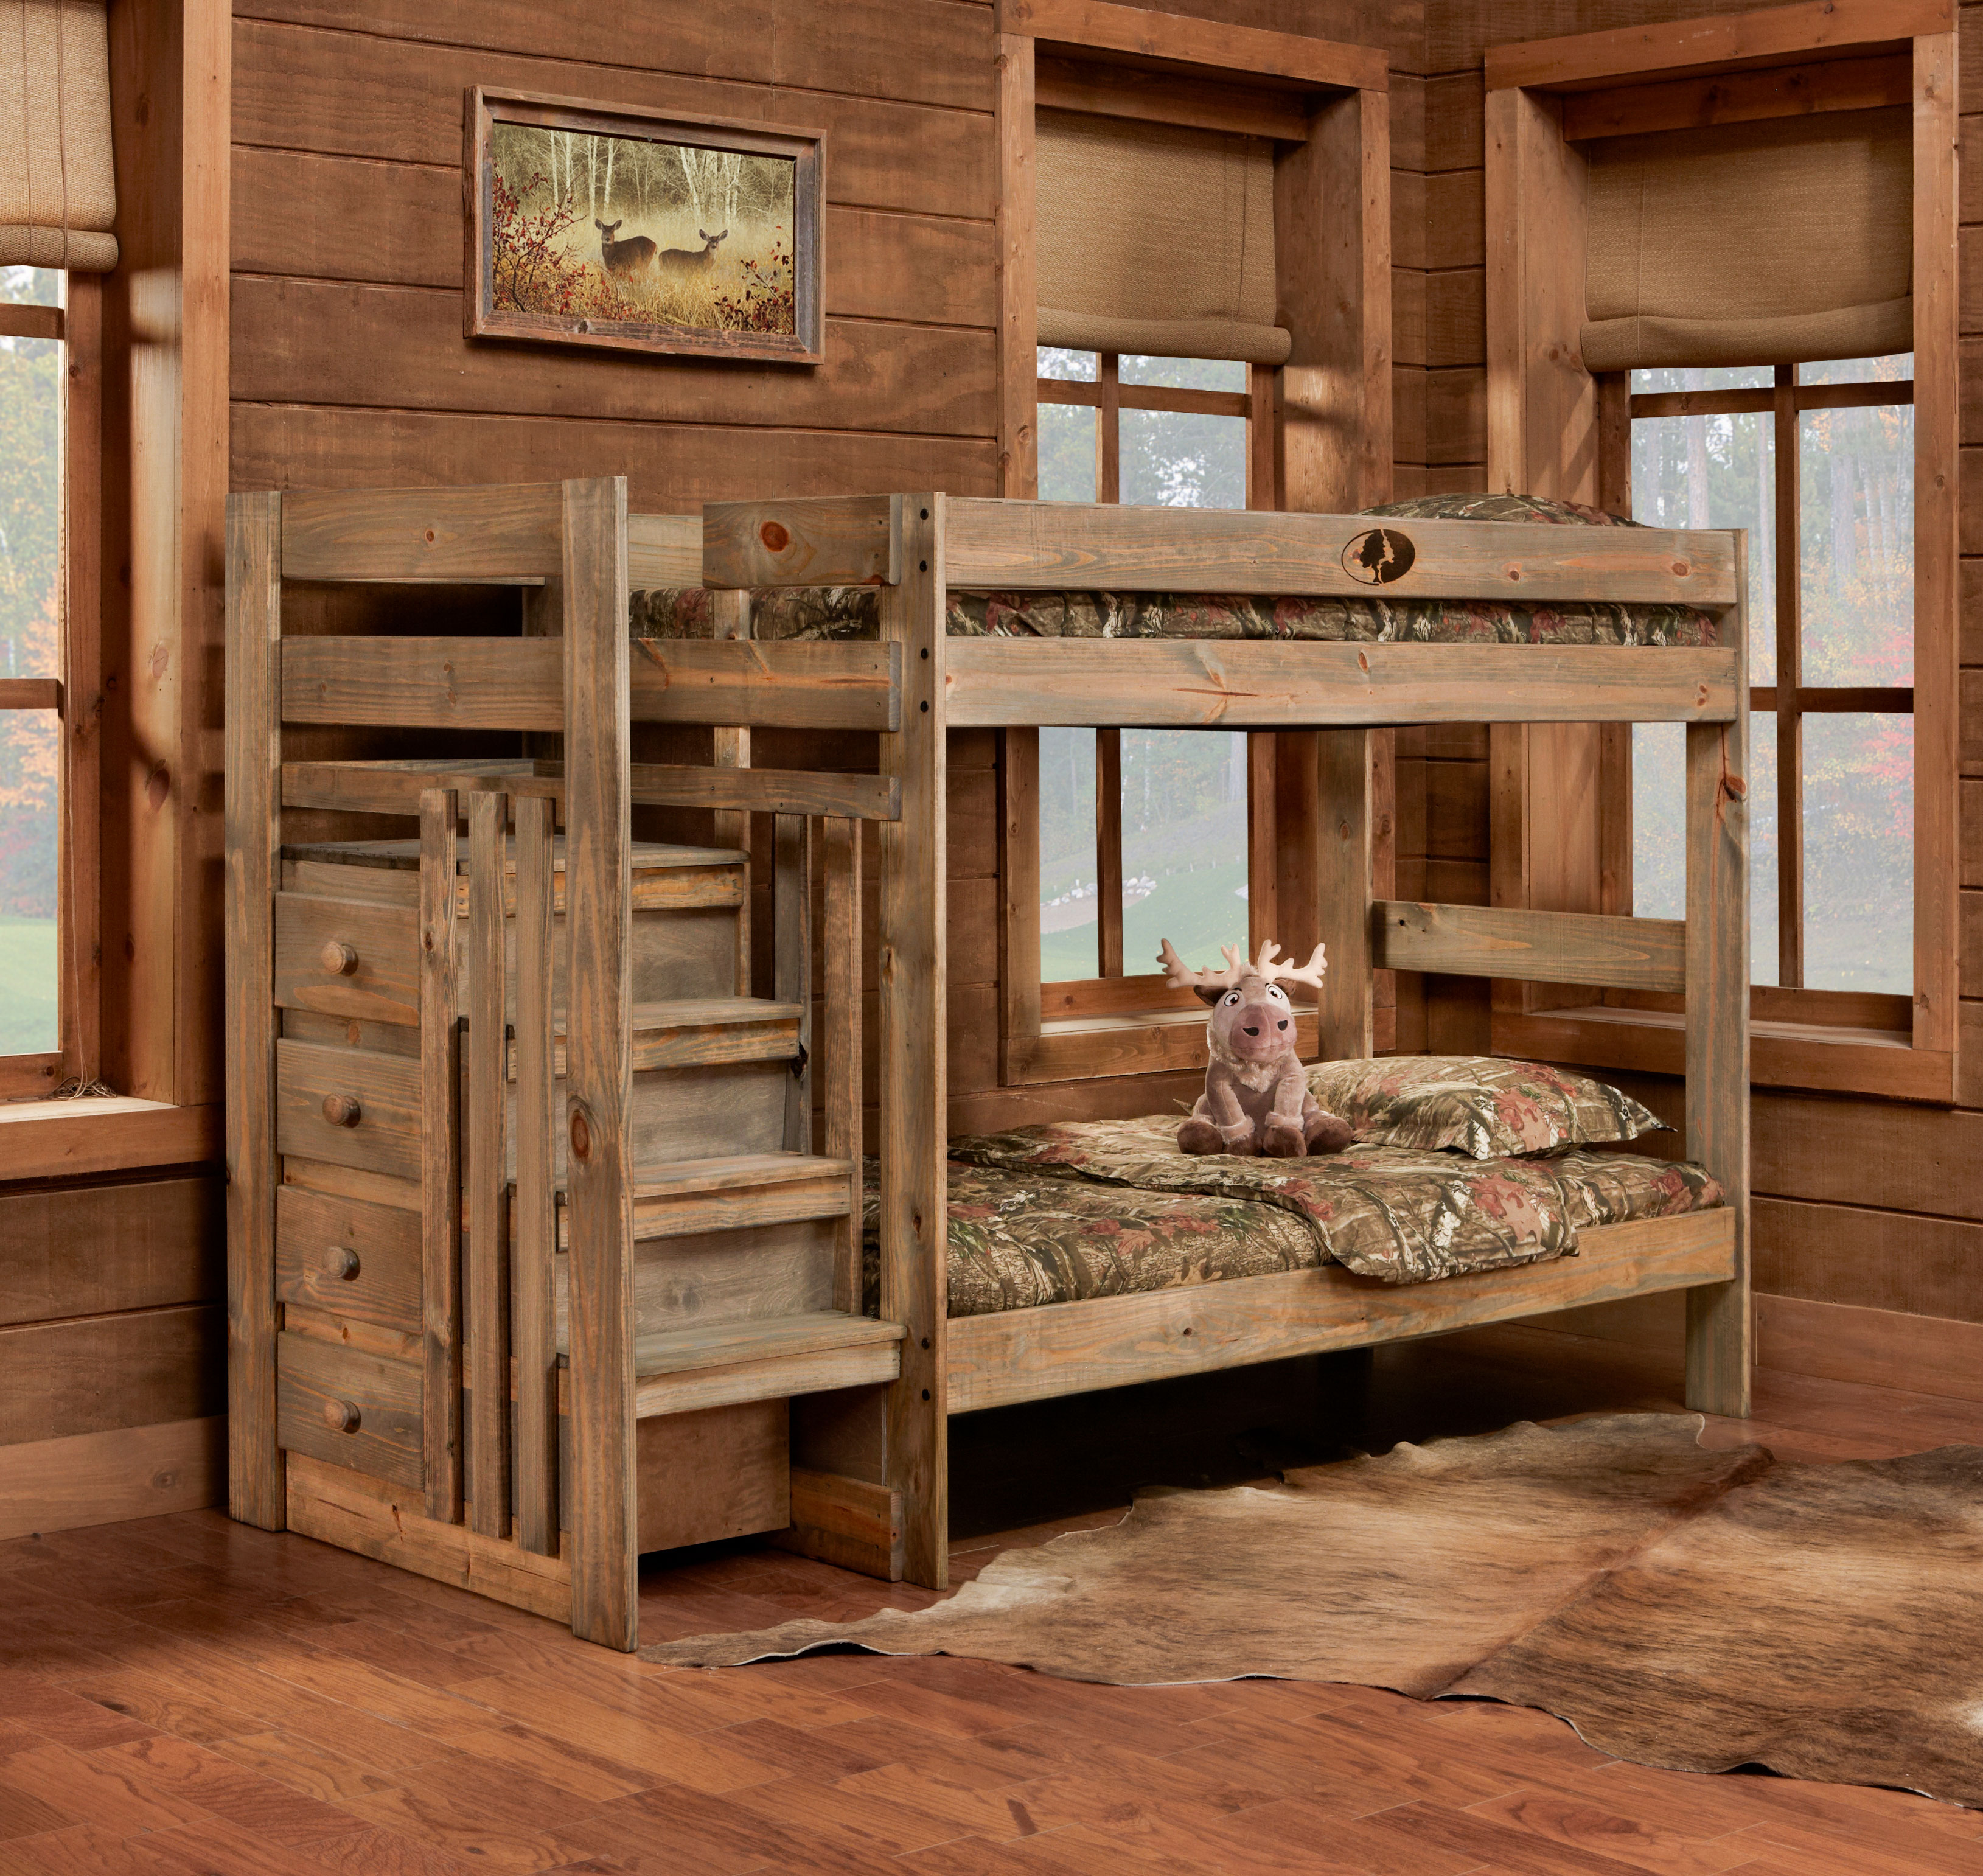 youth bunk beds